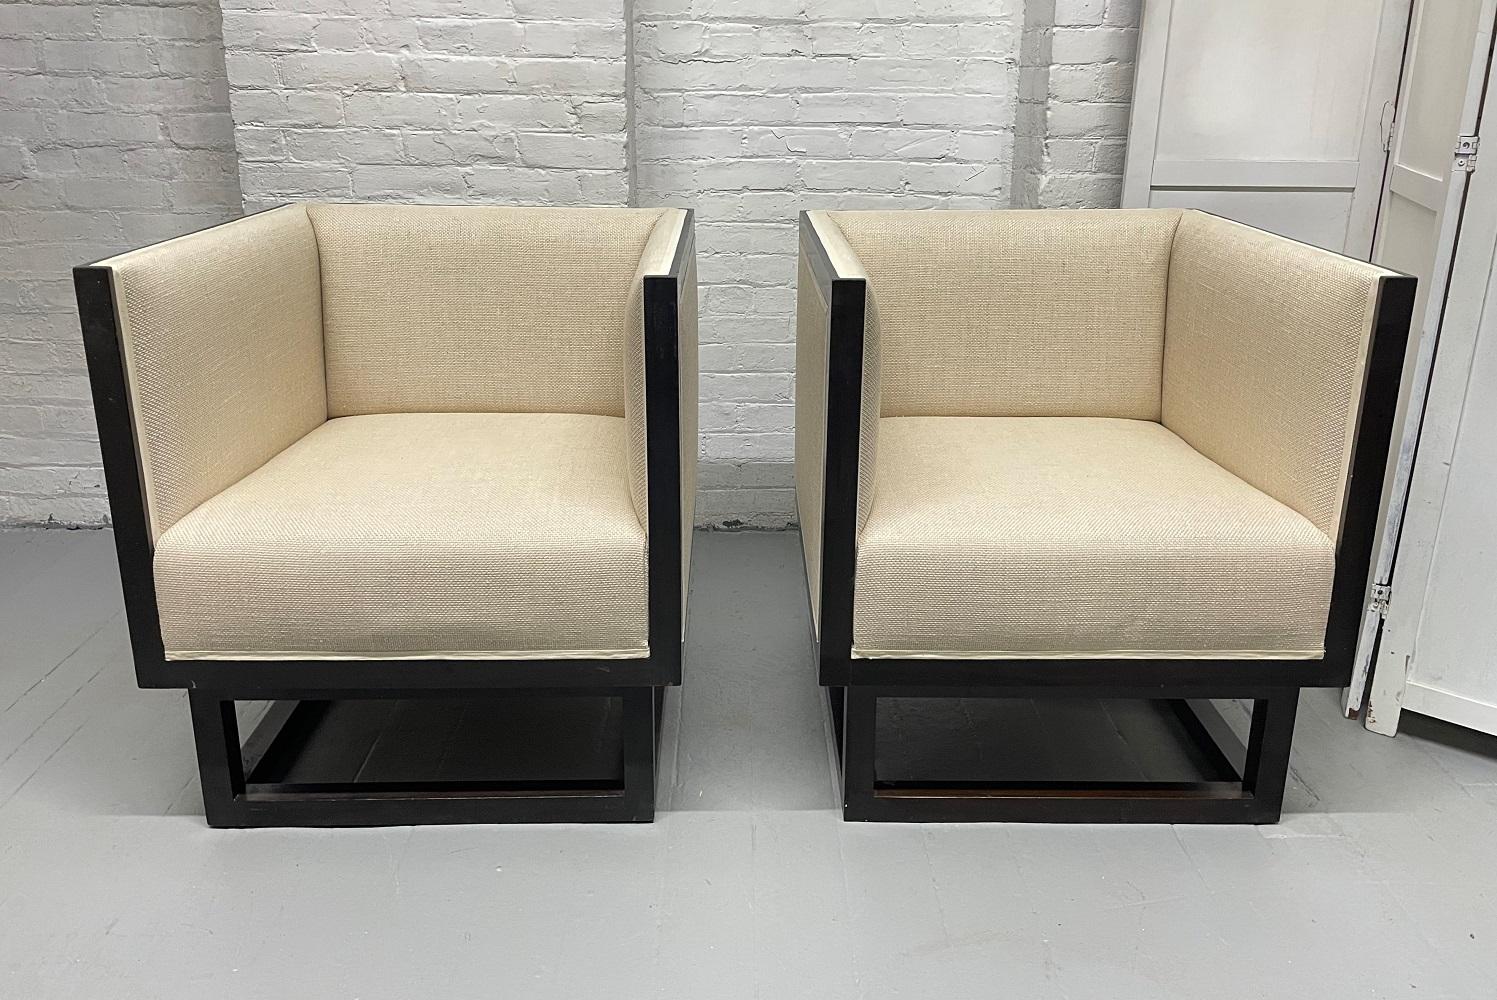 Chairs are upholstered in linen and the frame has a dark mahogany finish. Josef Hoffmann for Wittmann.